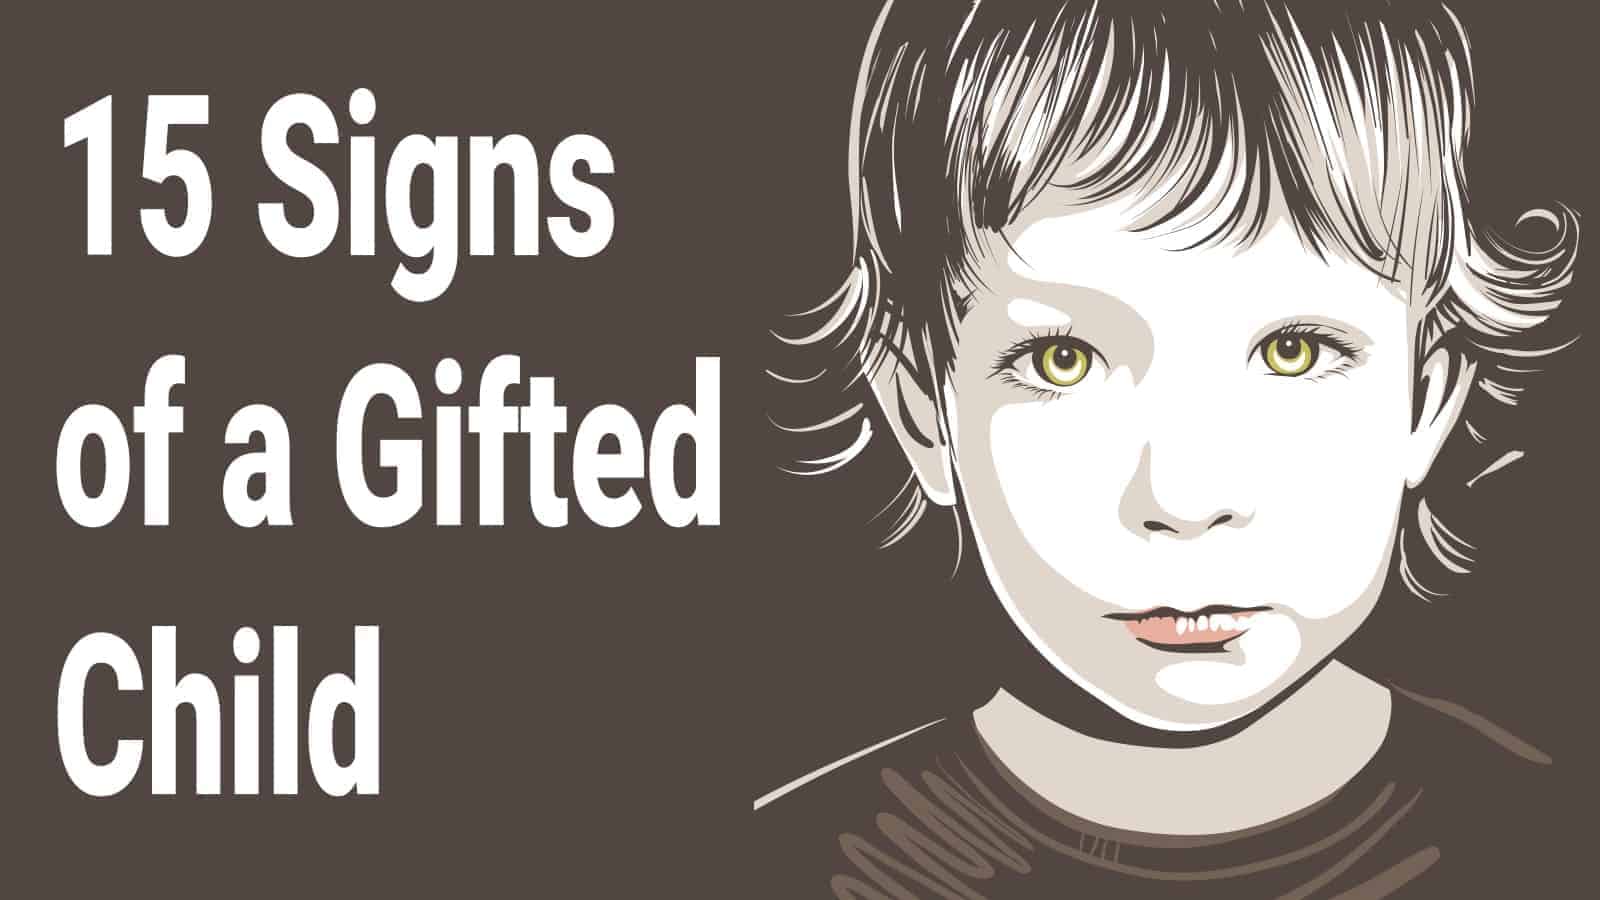 15 Signs of a Gifted Child